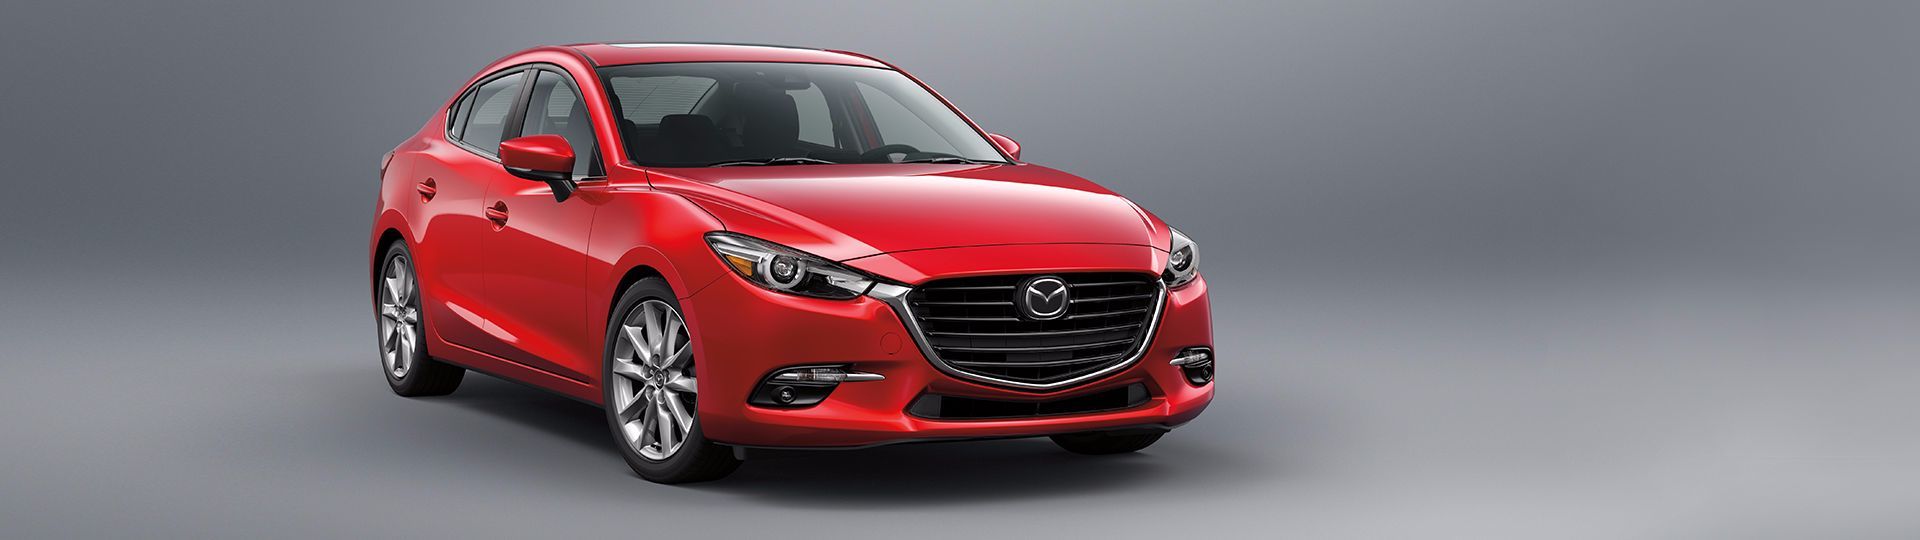 5 Things You Absolutely Need to Know About the 2017 Mazda3